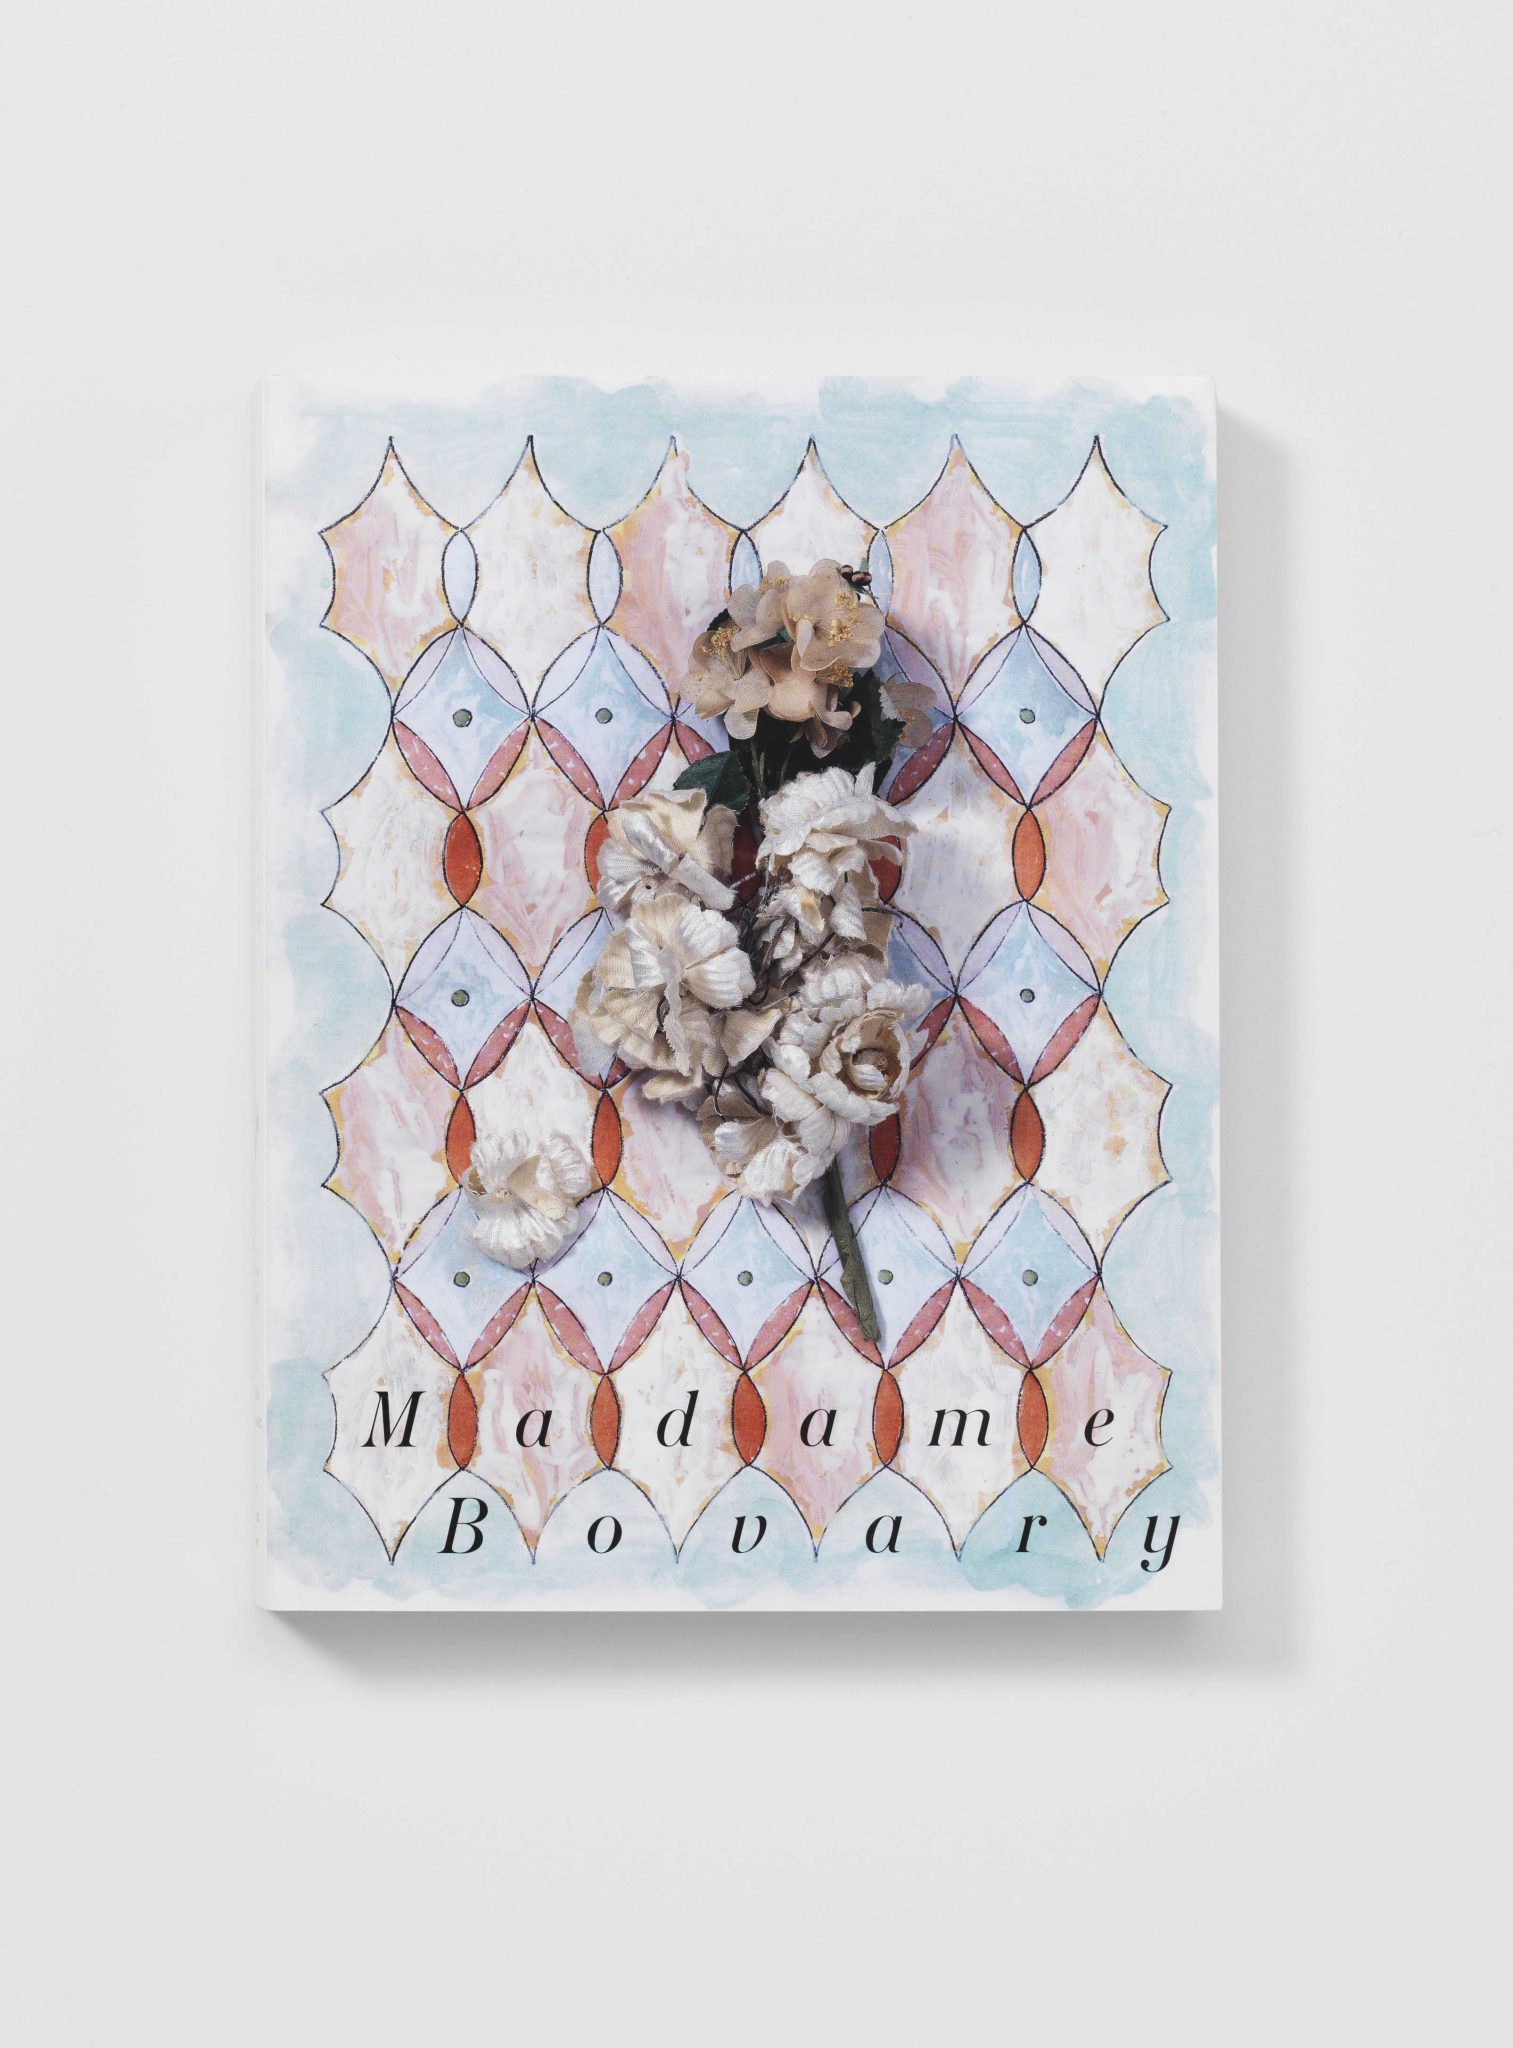 Madame Bovary by Gustave Flaubert, translated by Eleanor Marx-Aveling, artwork by Marc Camille Chaimowicz (Four Corners Books)